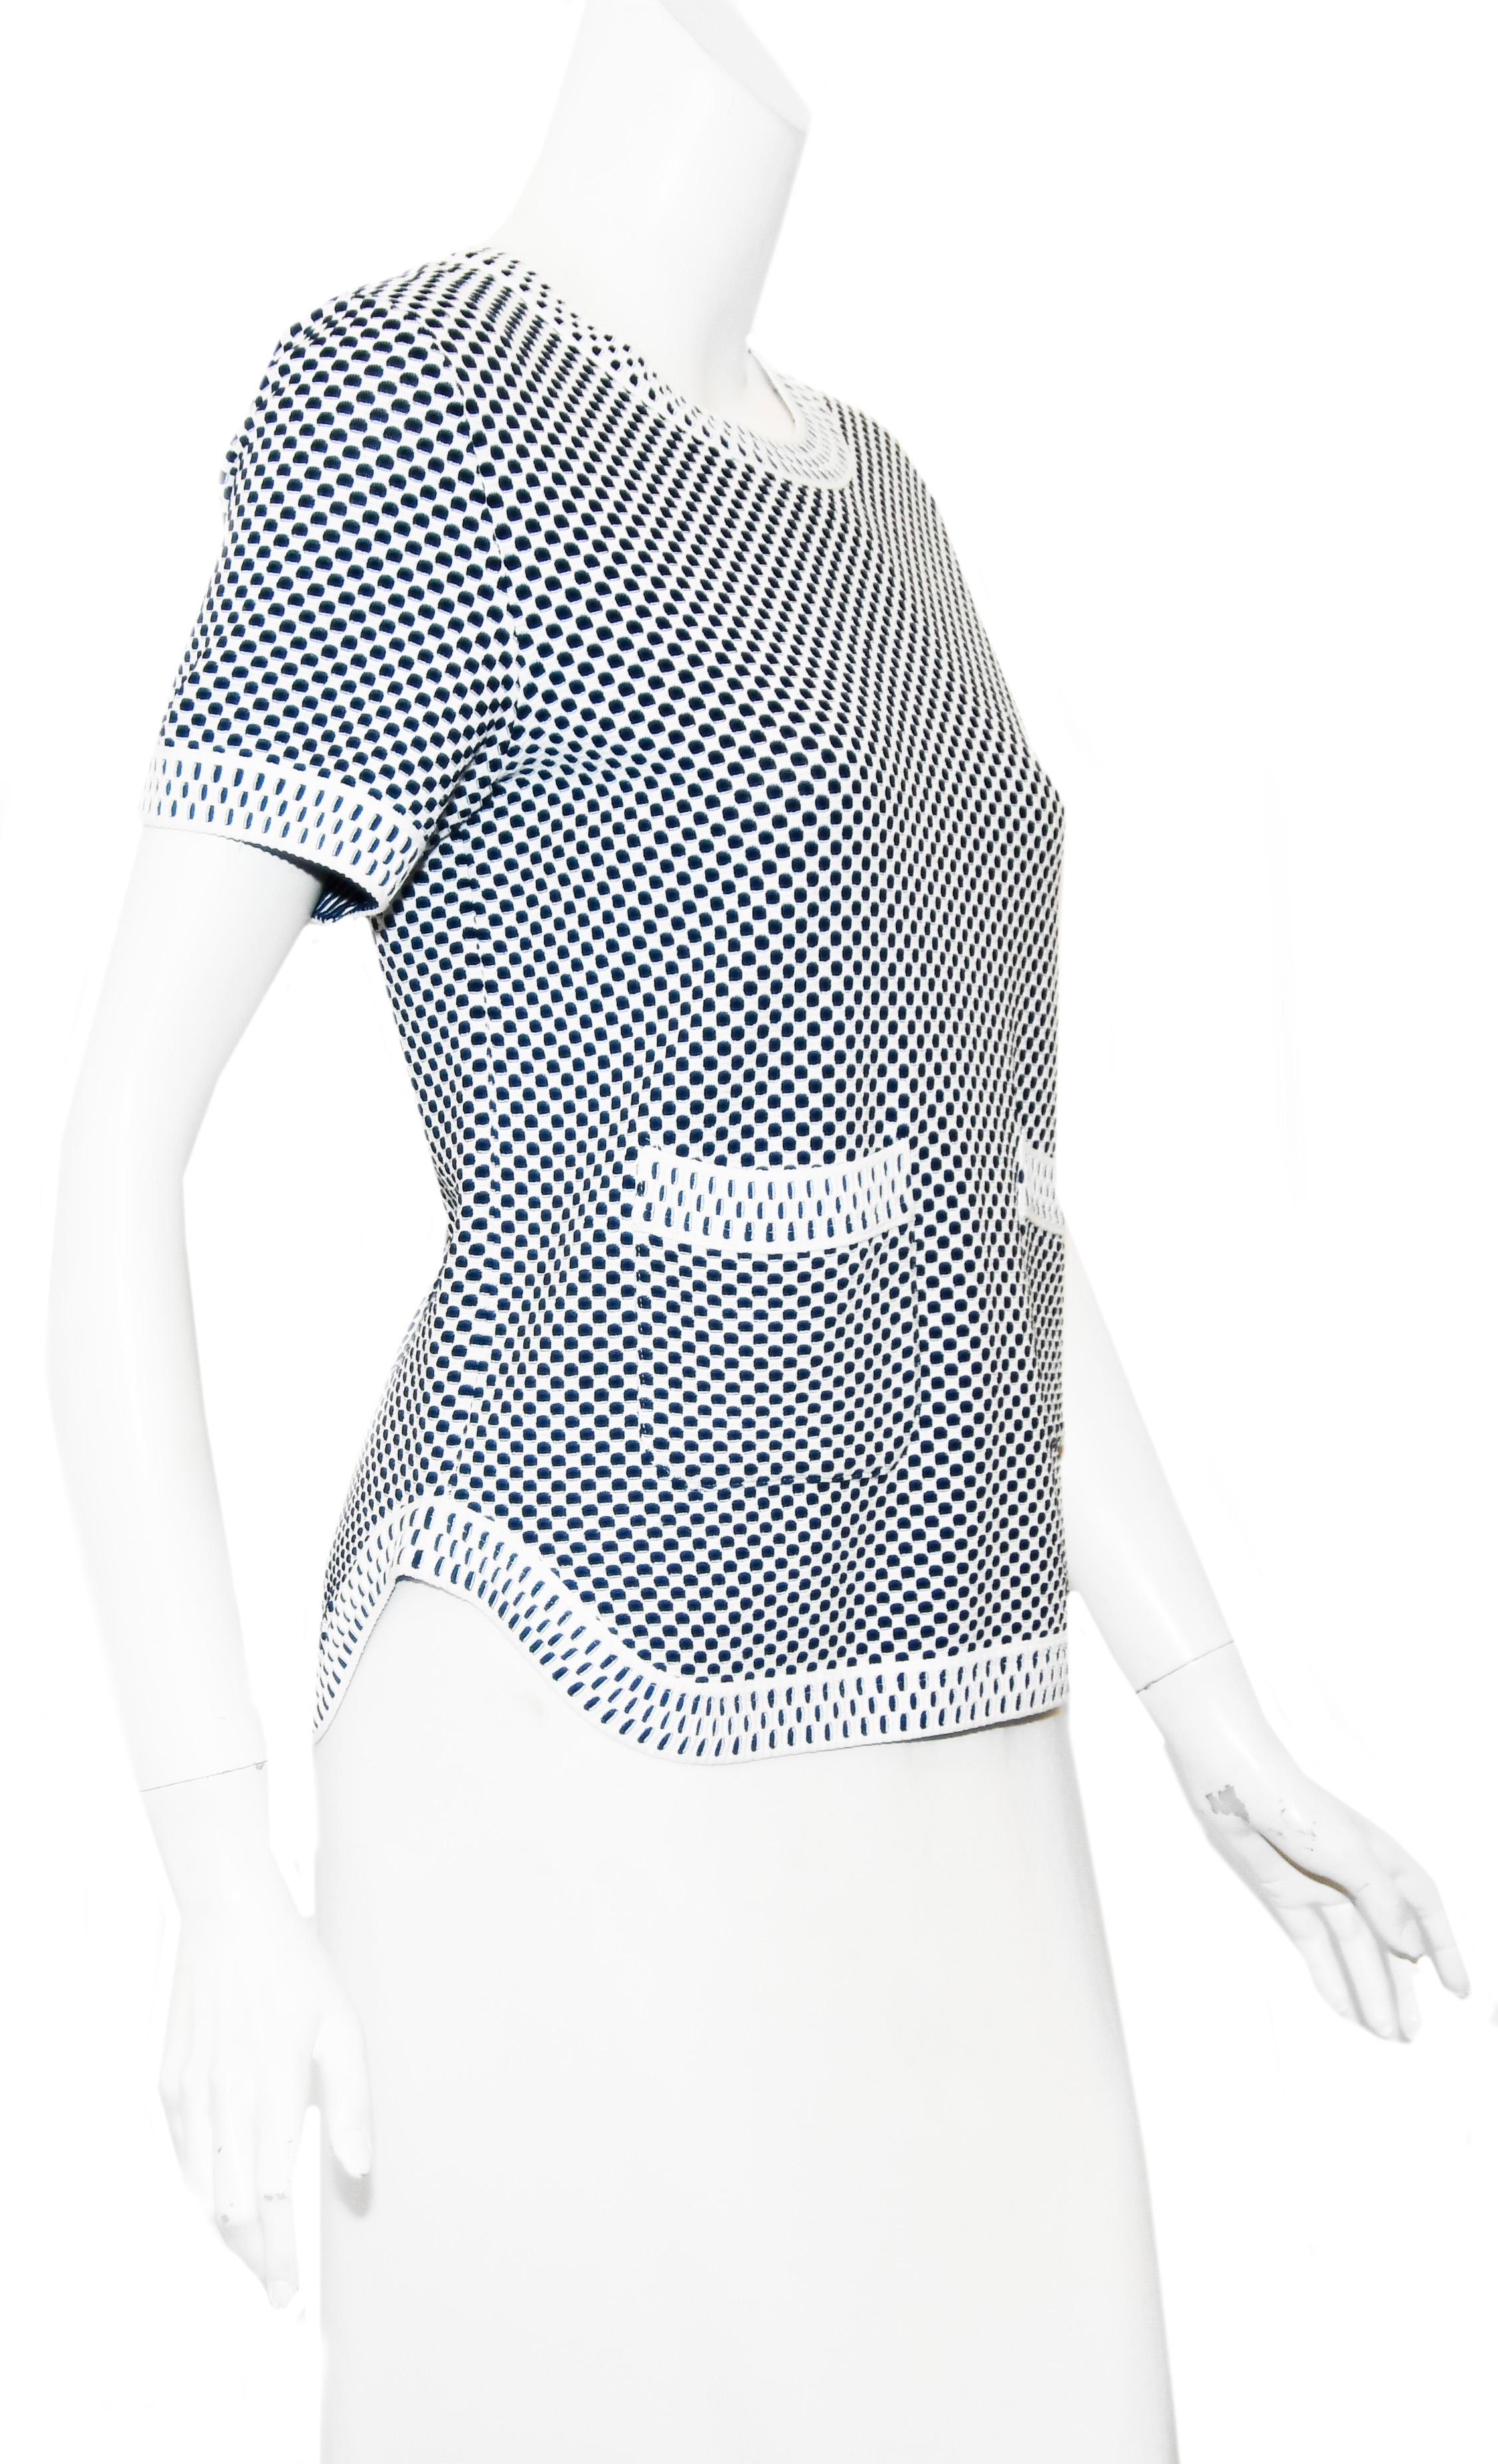 Chanel blue and white hypnotic print round collar knit top includes two front patch pockets, one with the CC logo plaque.  This top contains contrasting color schemes on the body of the top and the border trim.  The hem has decorative side openings.